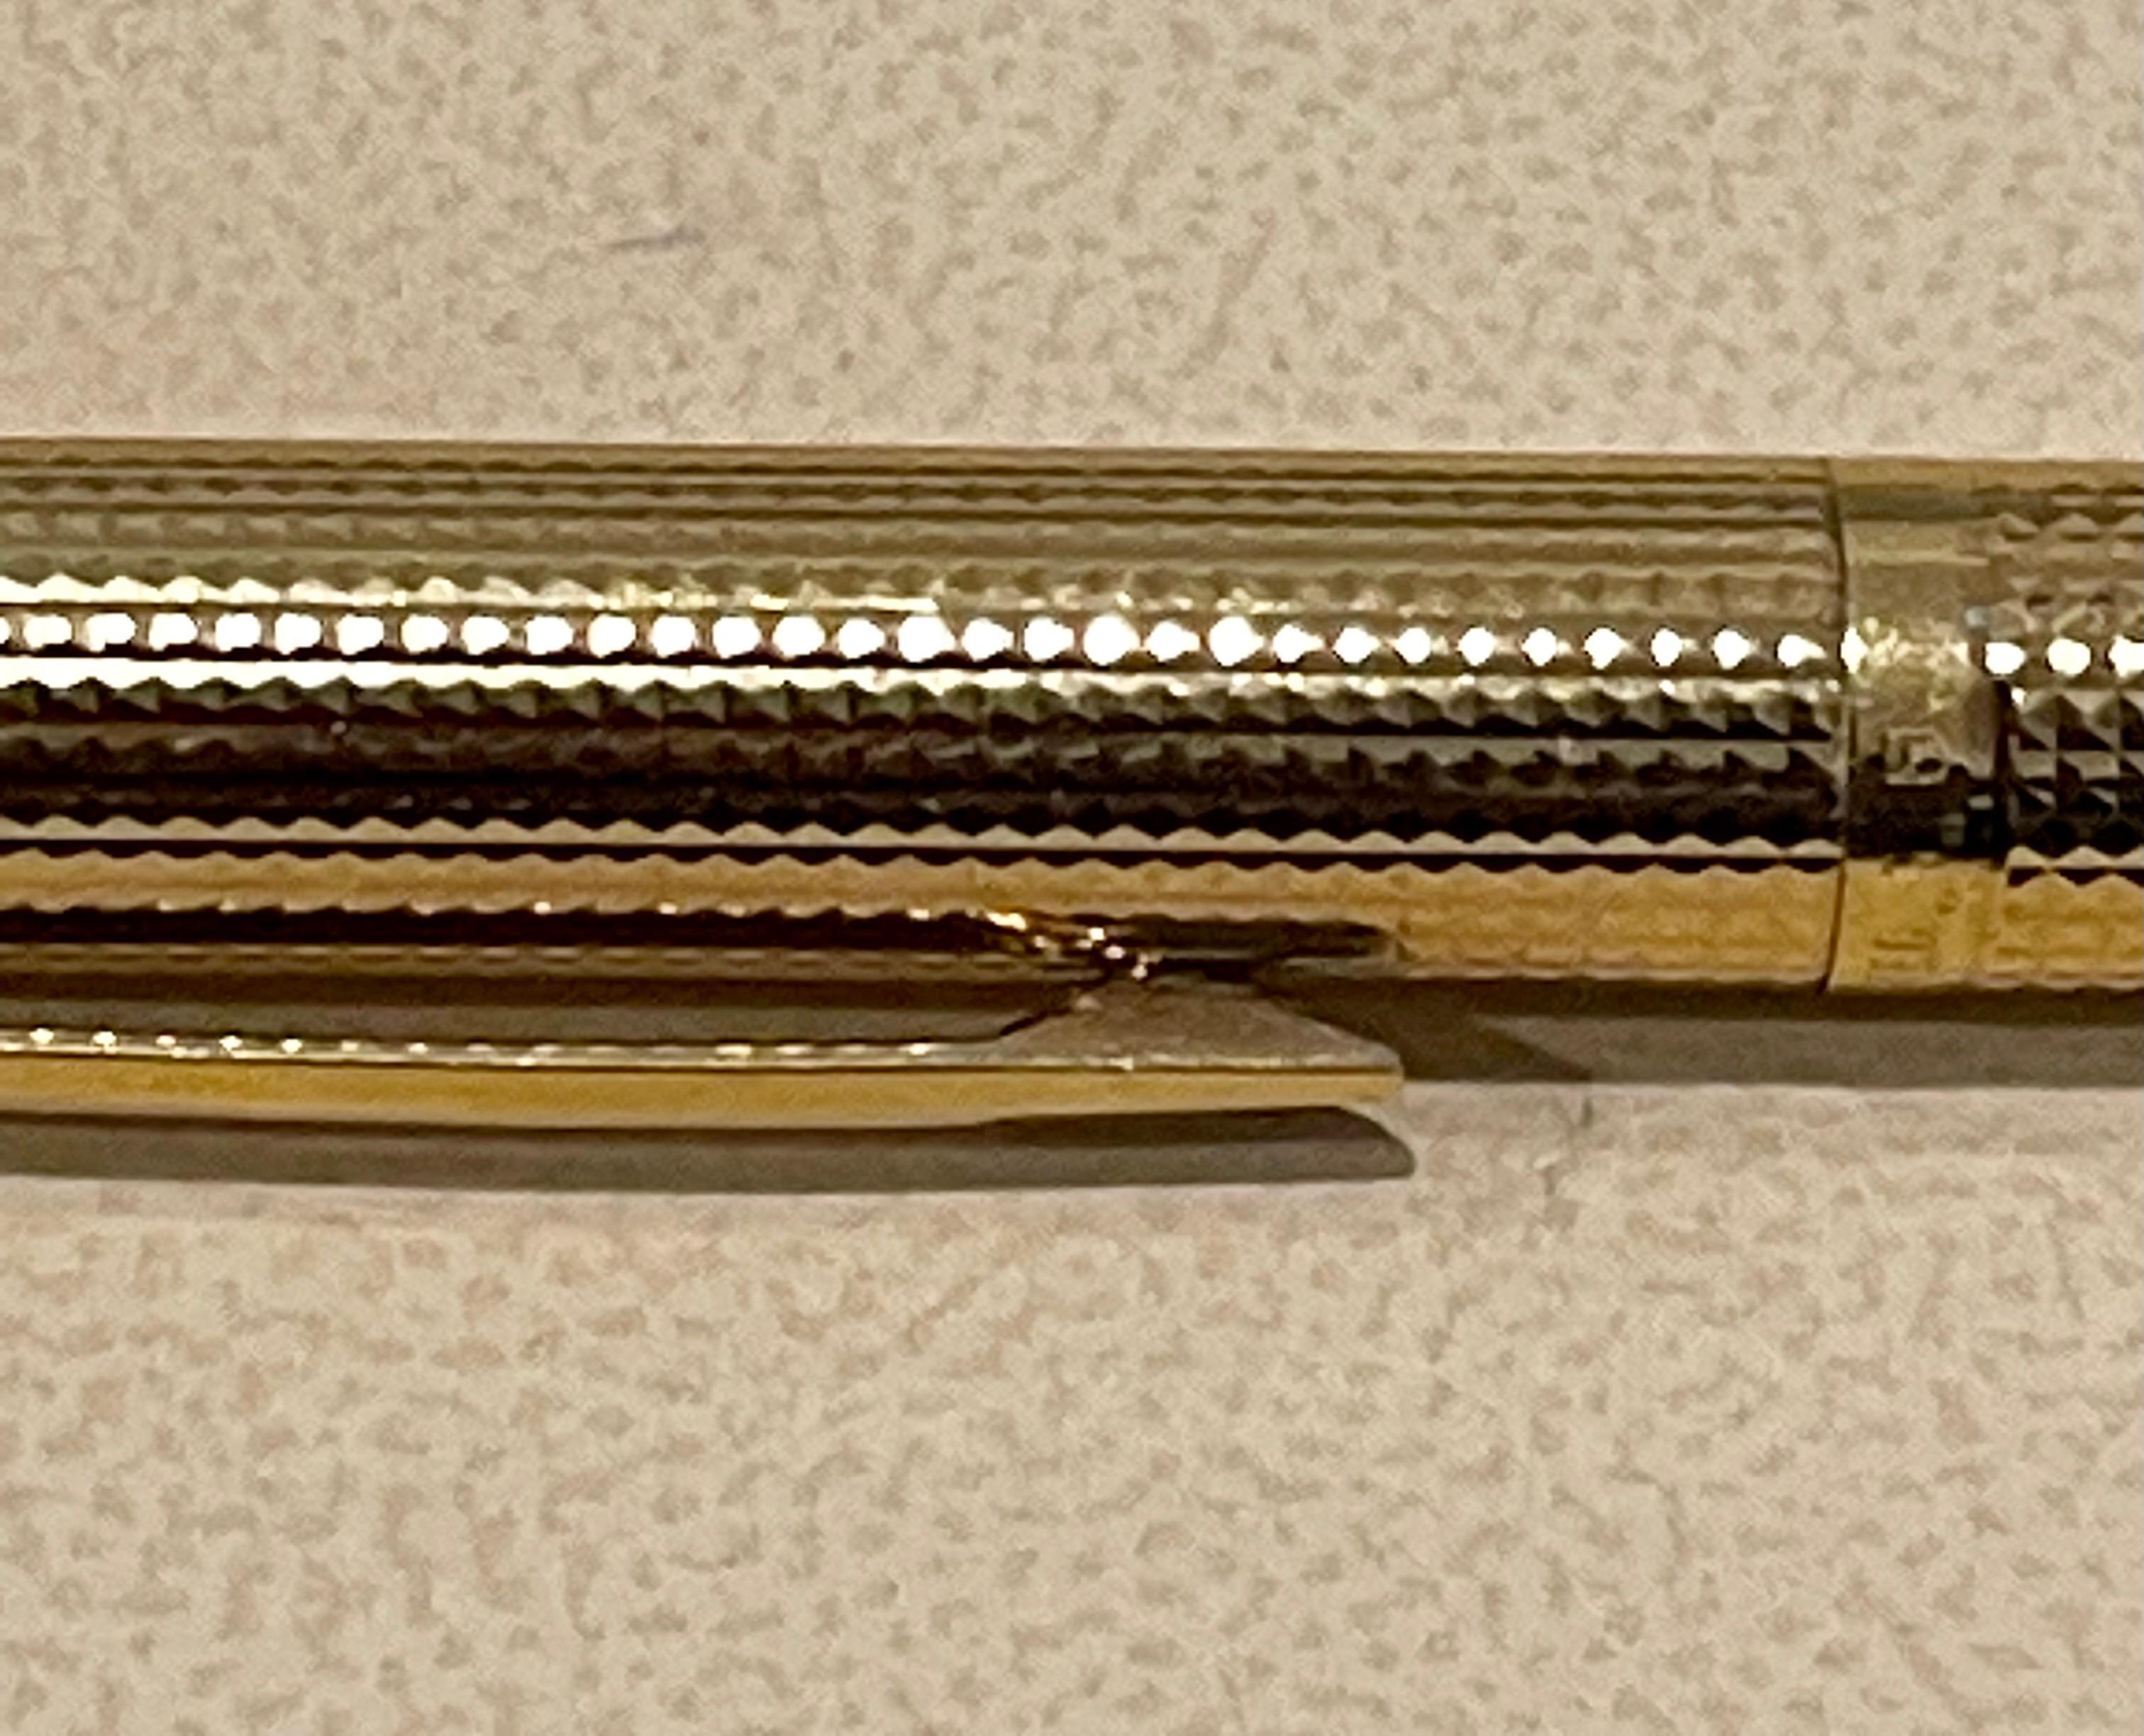 Caran d'Ache Fountain Pen Of Prestige Gold Plated Made in Switzerland 5